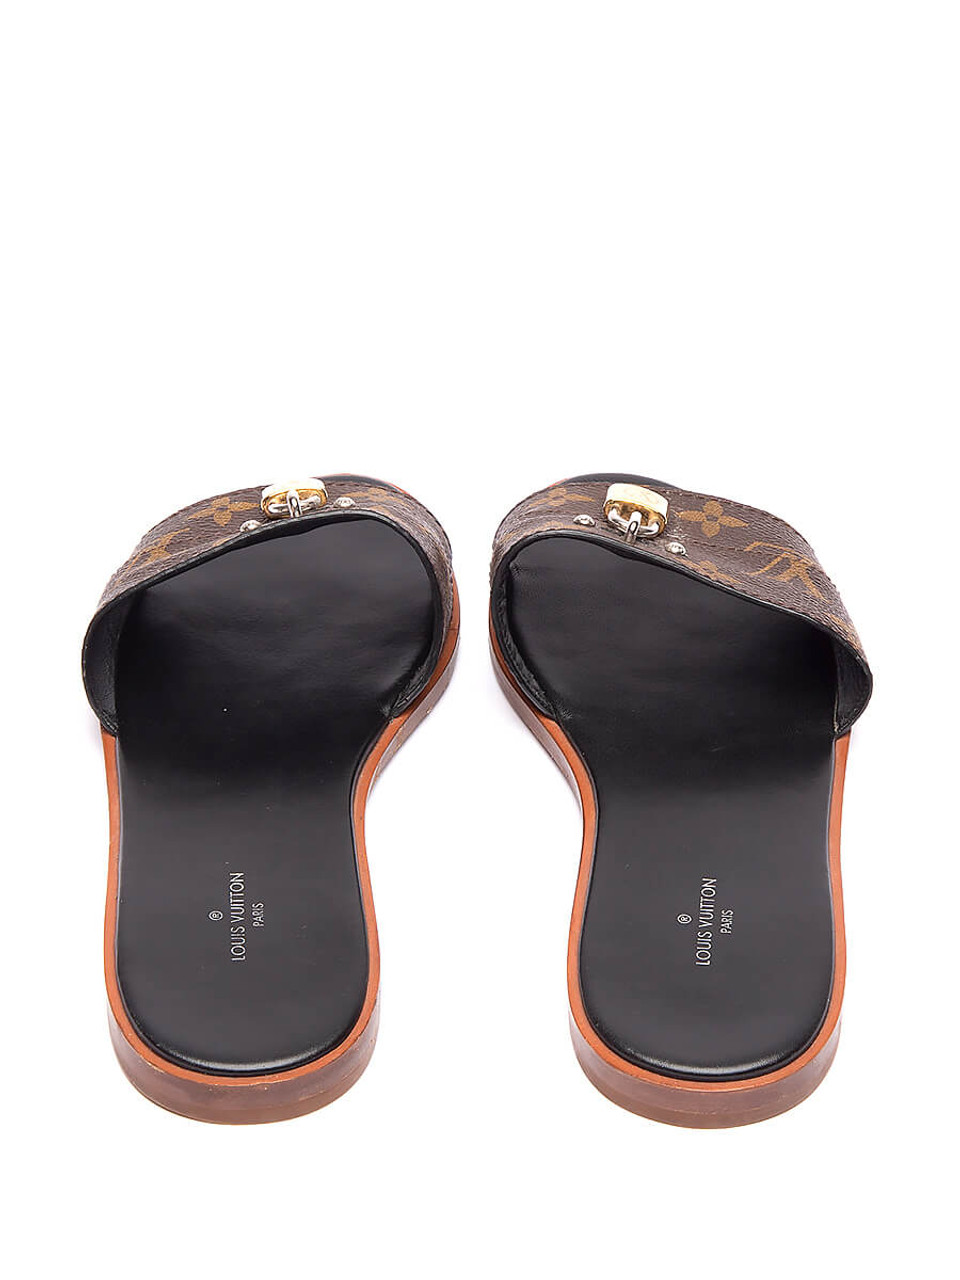 LOUIS VUITTON LOUIS VUITTON Sandals shoes leather Brown Used Women logo LV  size 39 12 Product Code2104102058919BRAND OFF Online Store